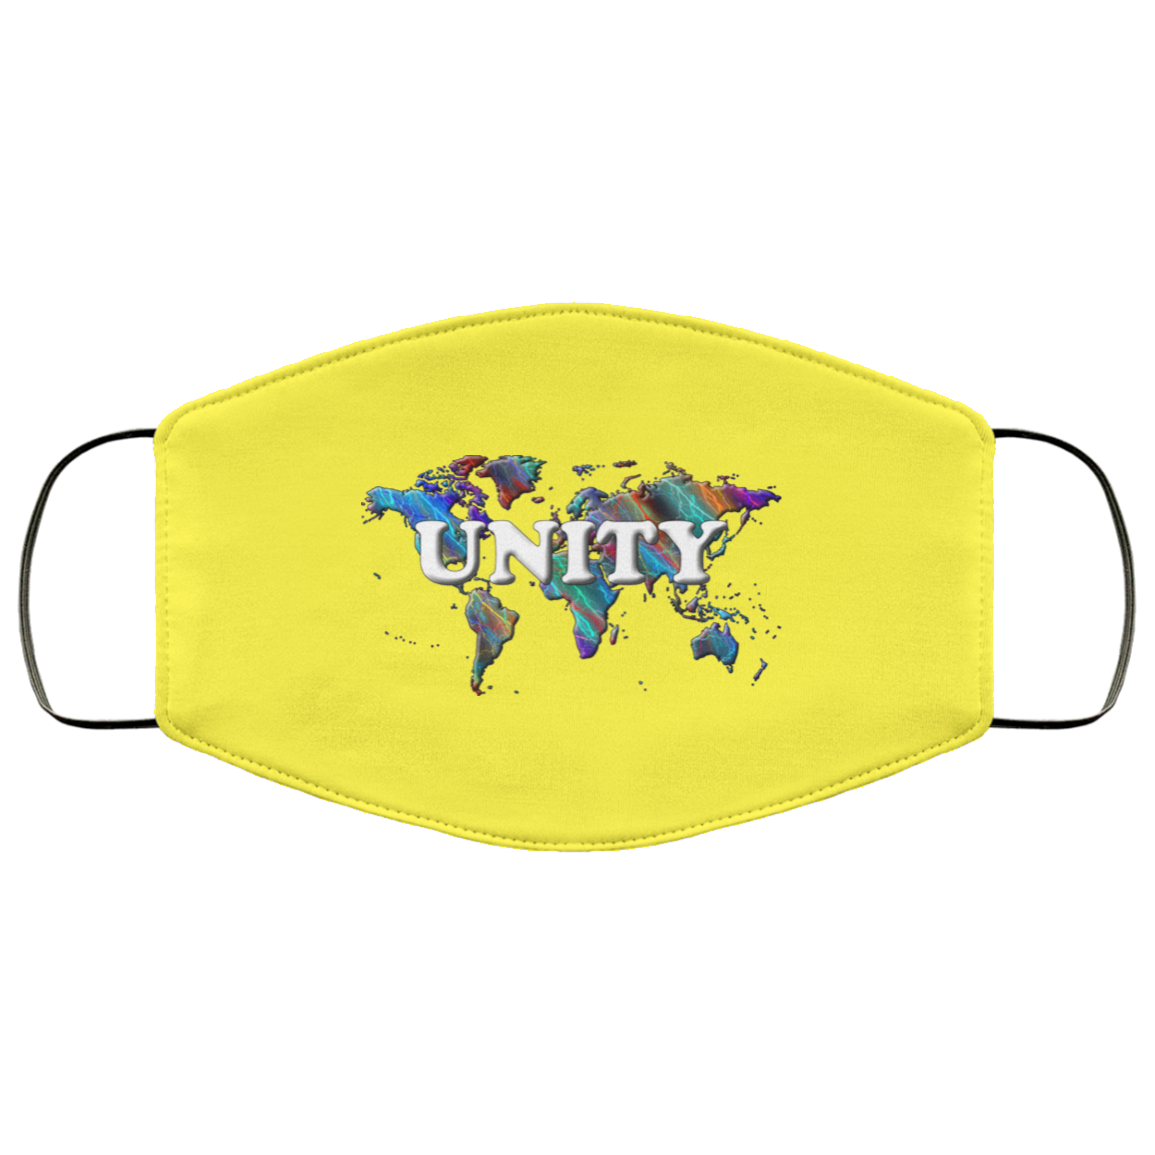 Unity 2 Layer Protective Mask